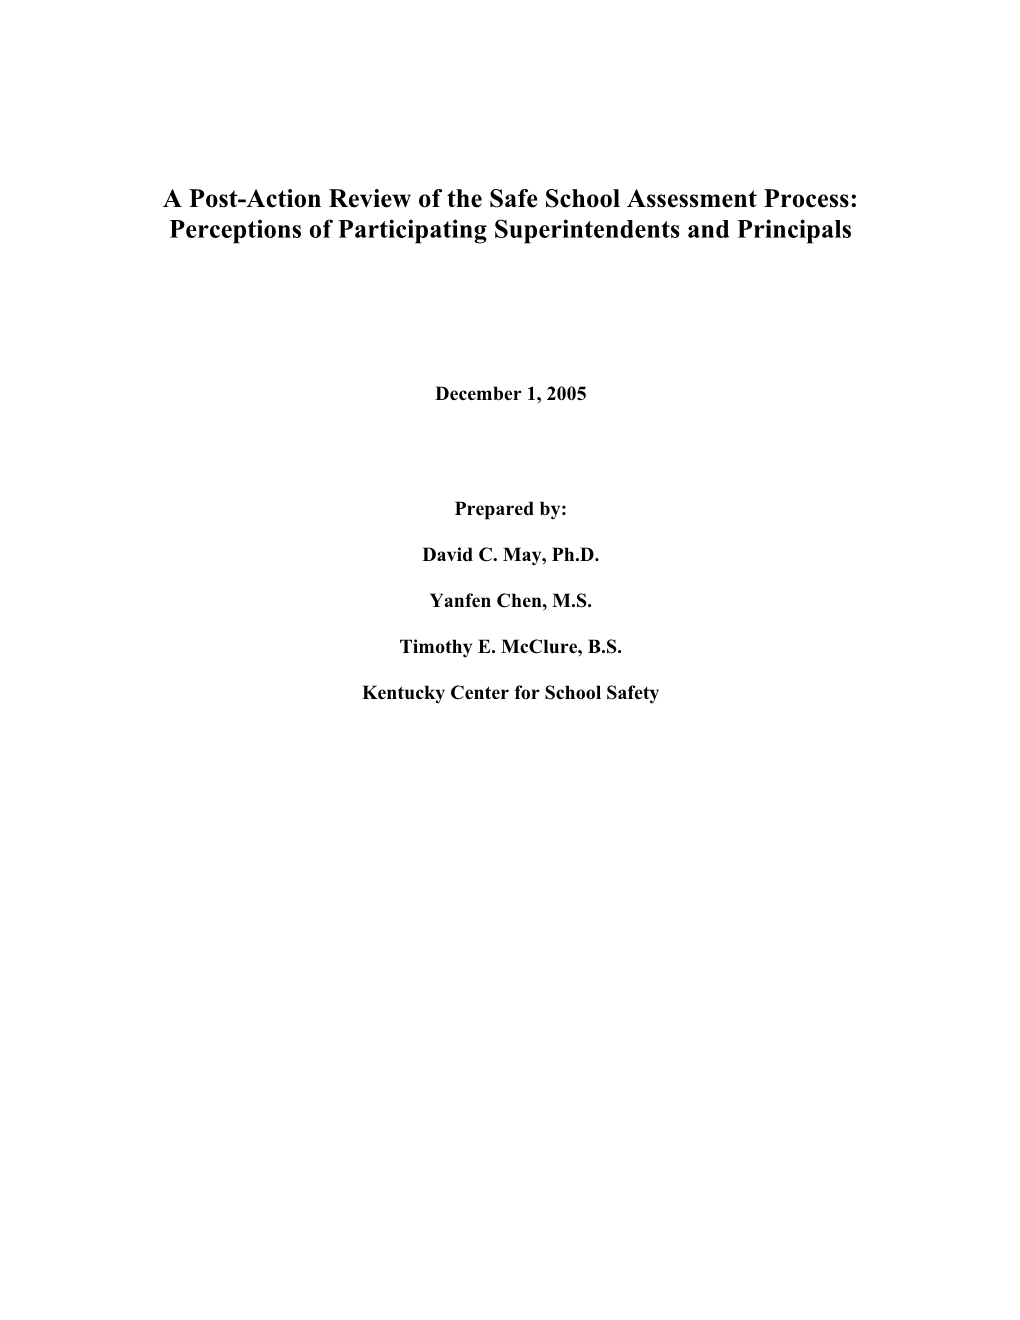 A Post-Action Review of the Safe School Assessment Process